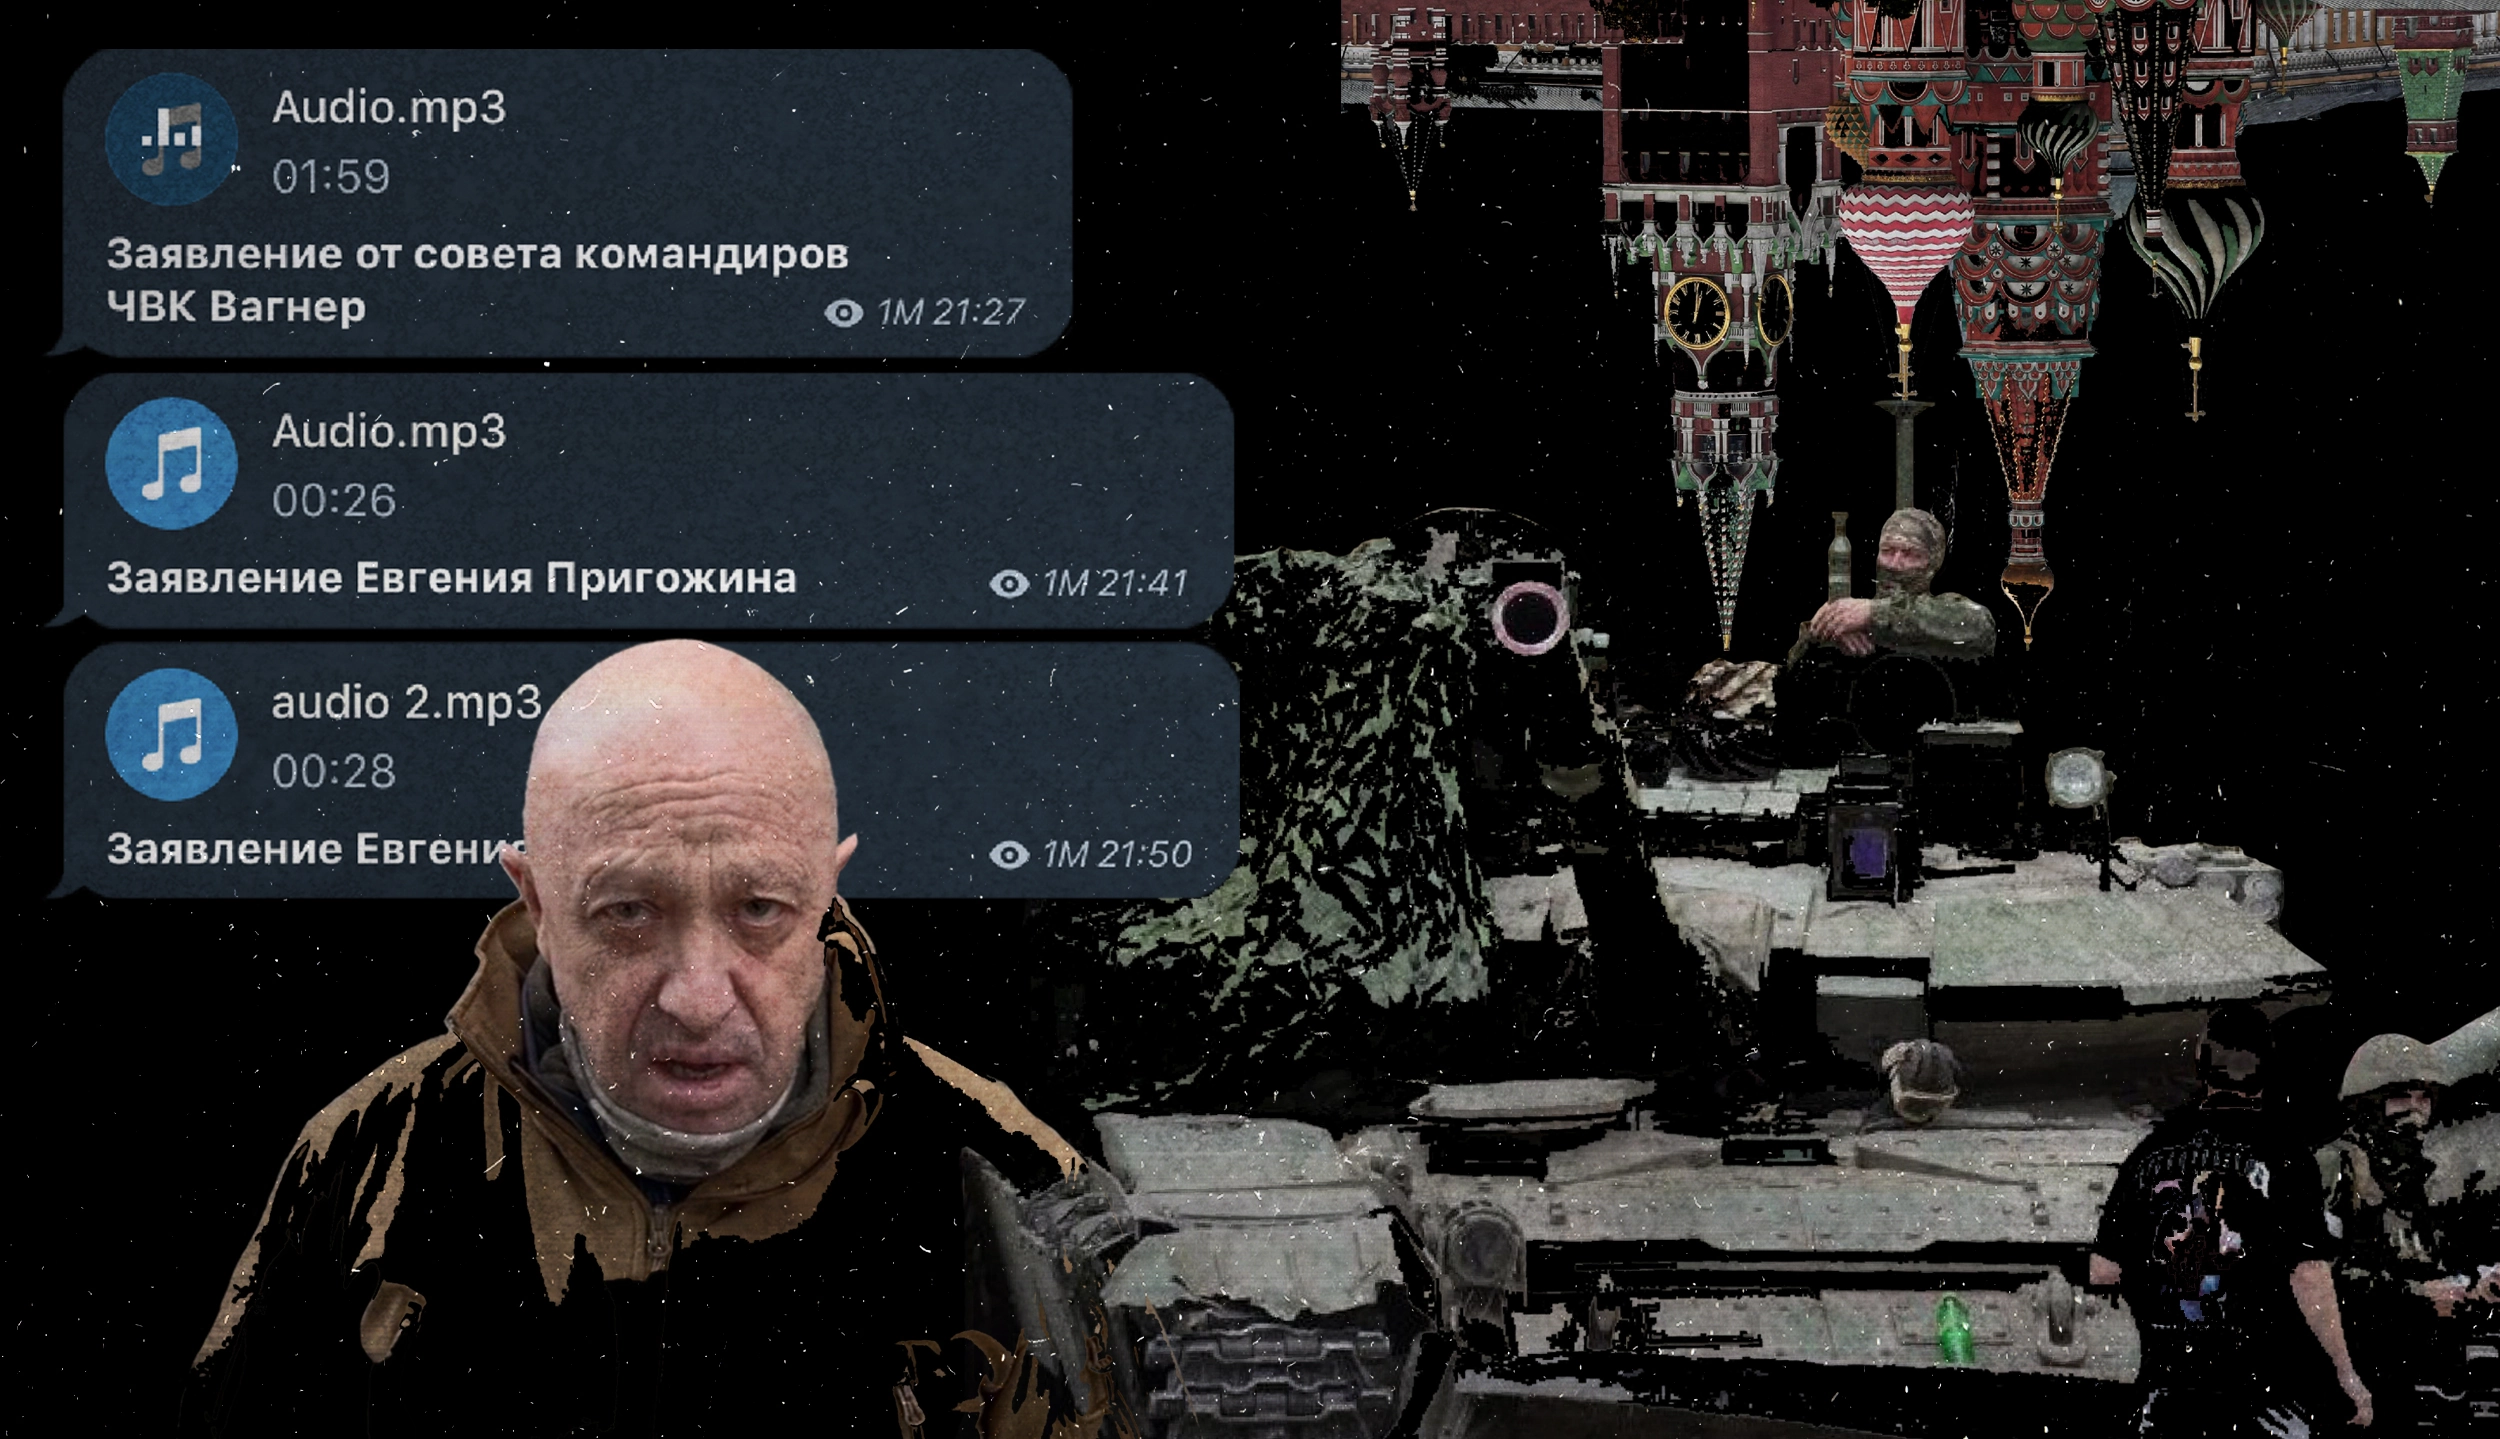 “Prigozhin’s March”: What Was It All About?